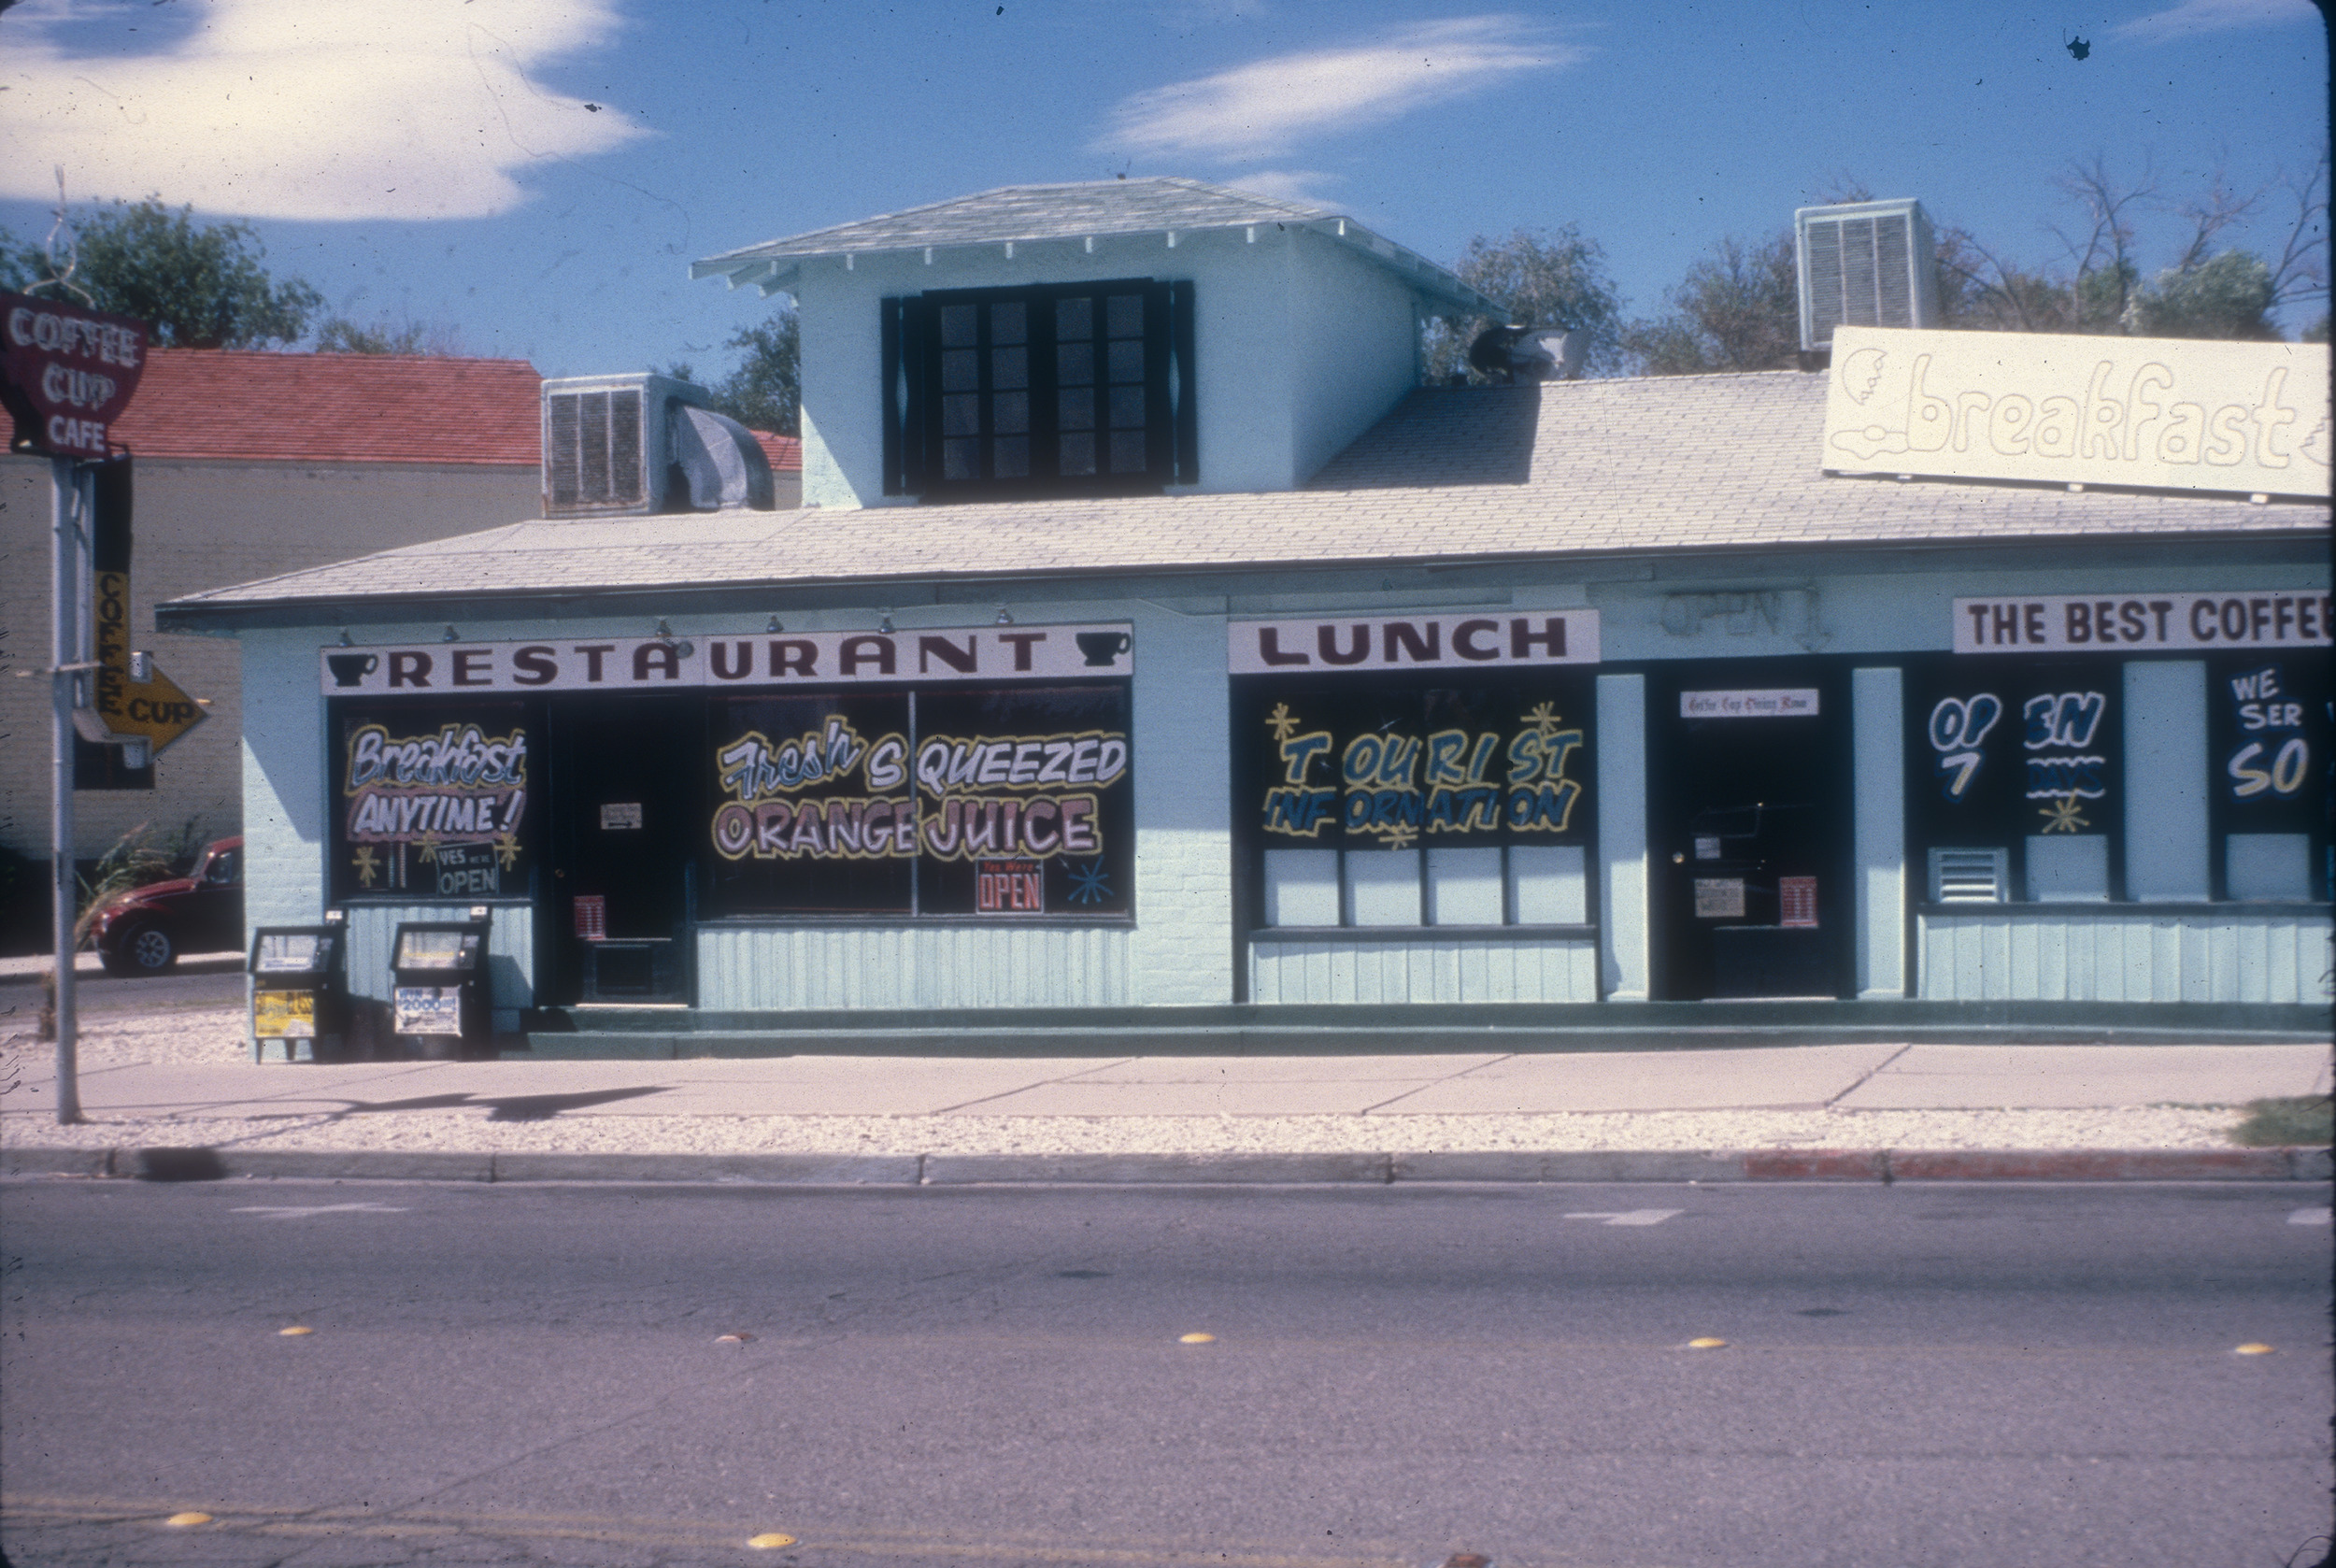 Slide of the Coffee Cup Cafe, Boulder City, Nevada, 1986